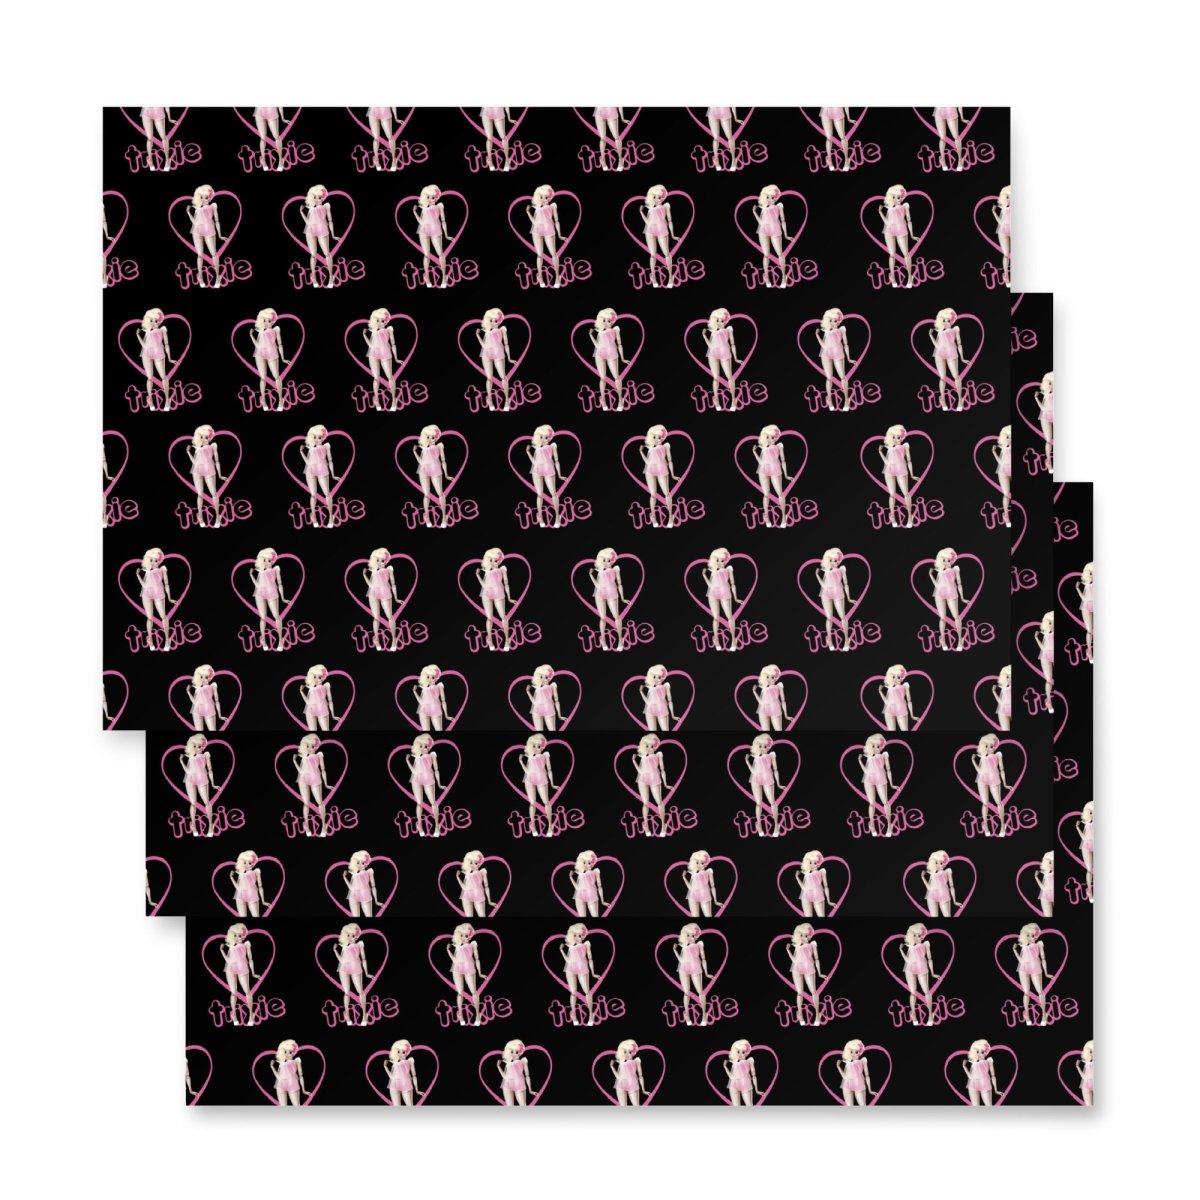 Trixie mattel - Living Doll Wrapping paper sheets - dragqueenmerch